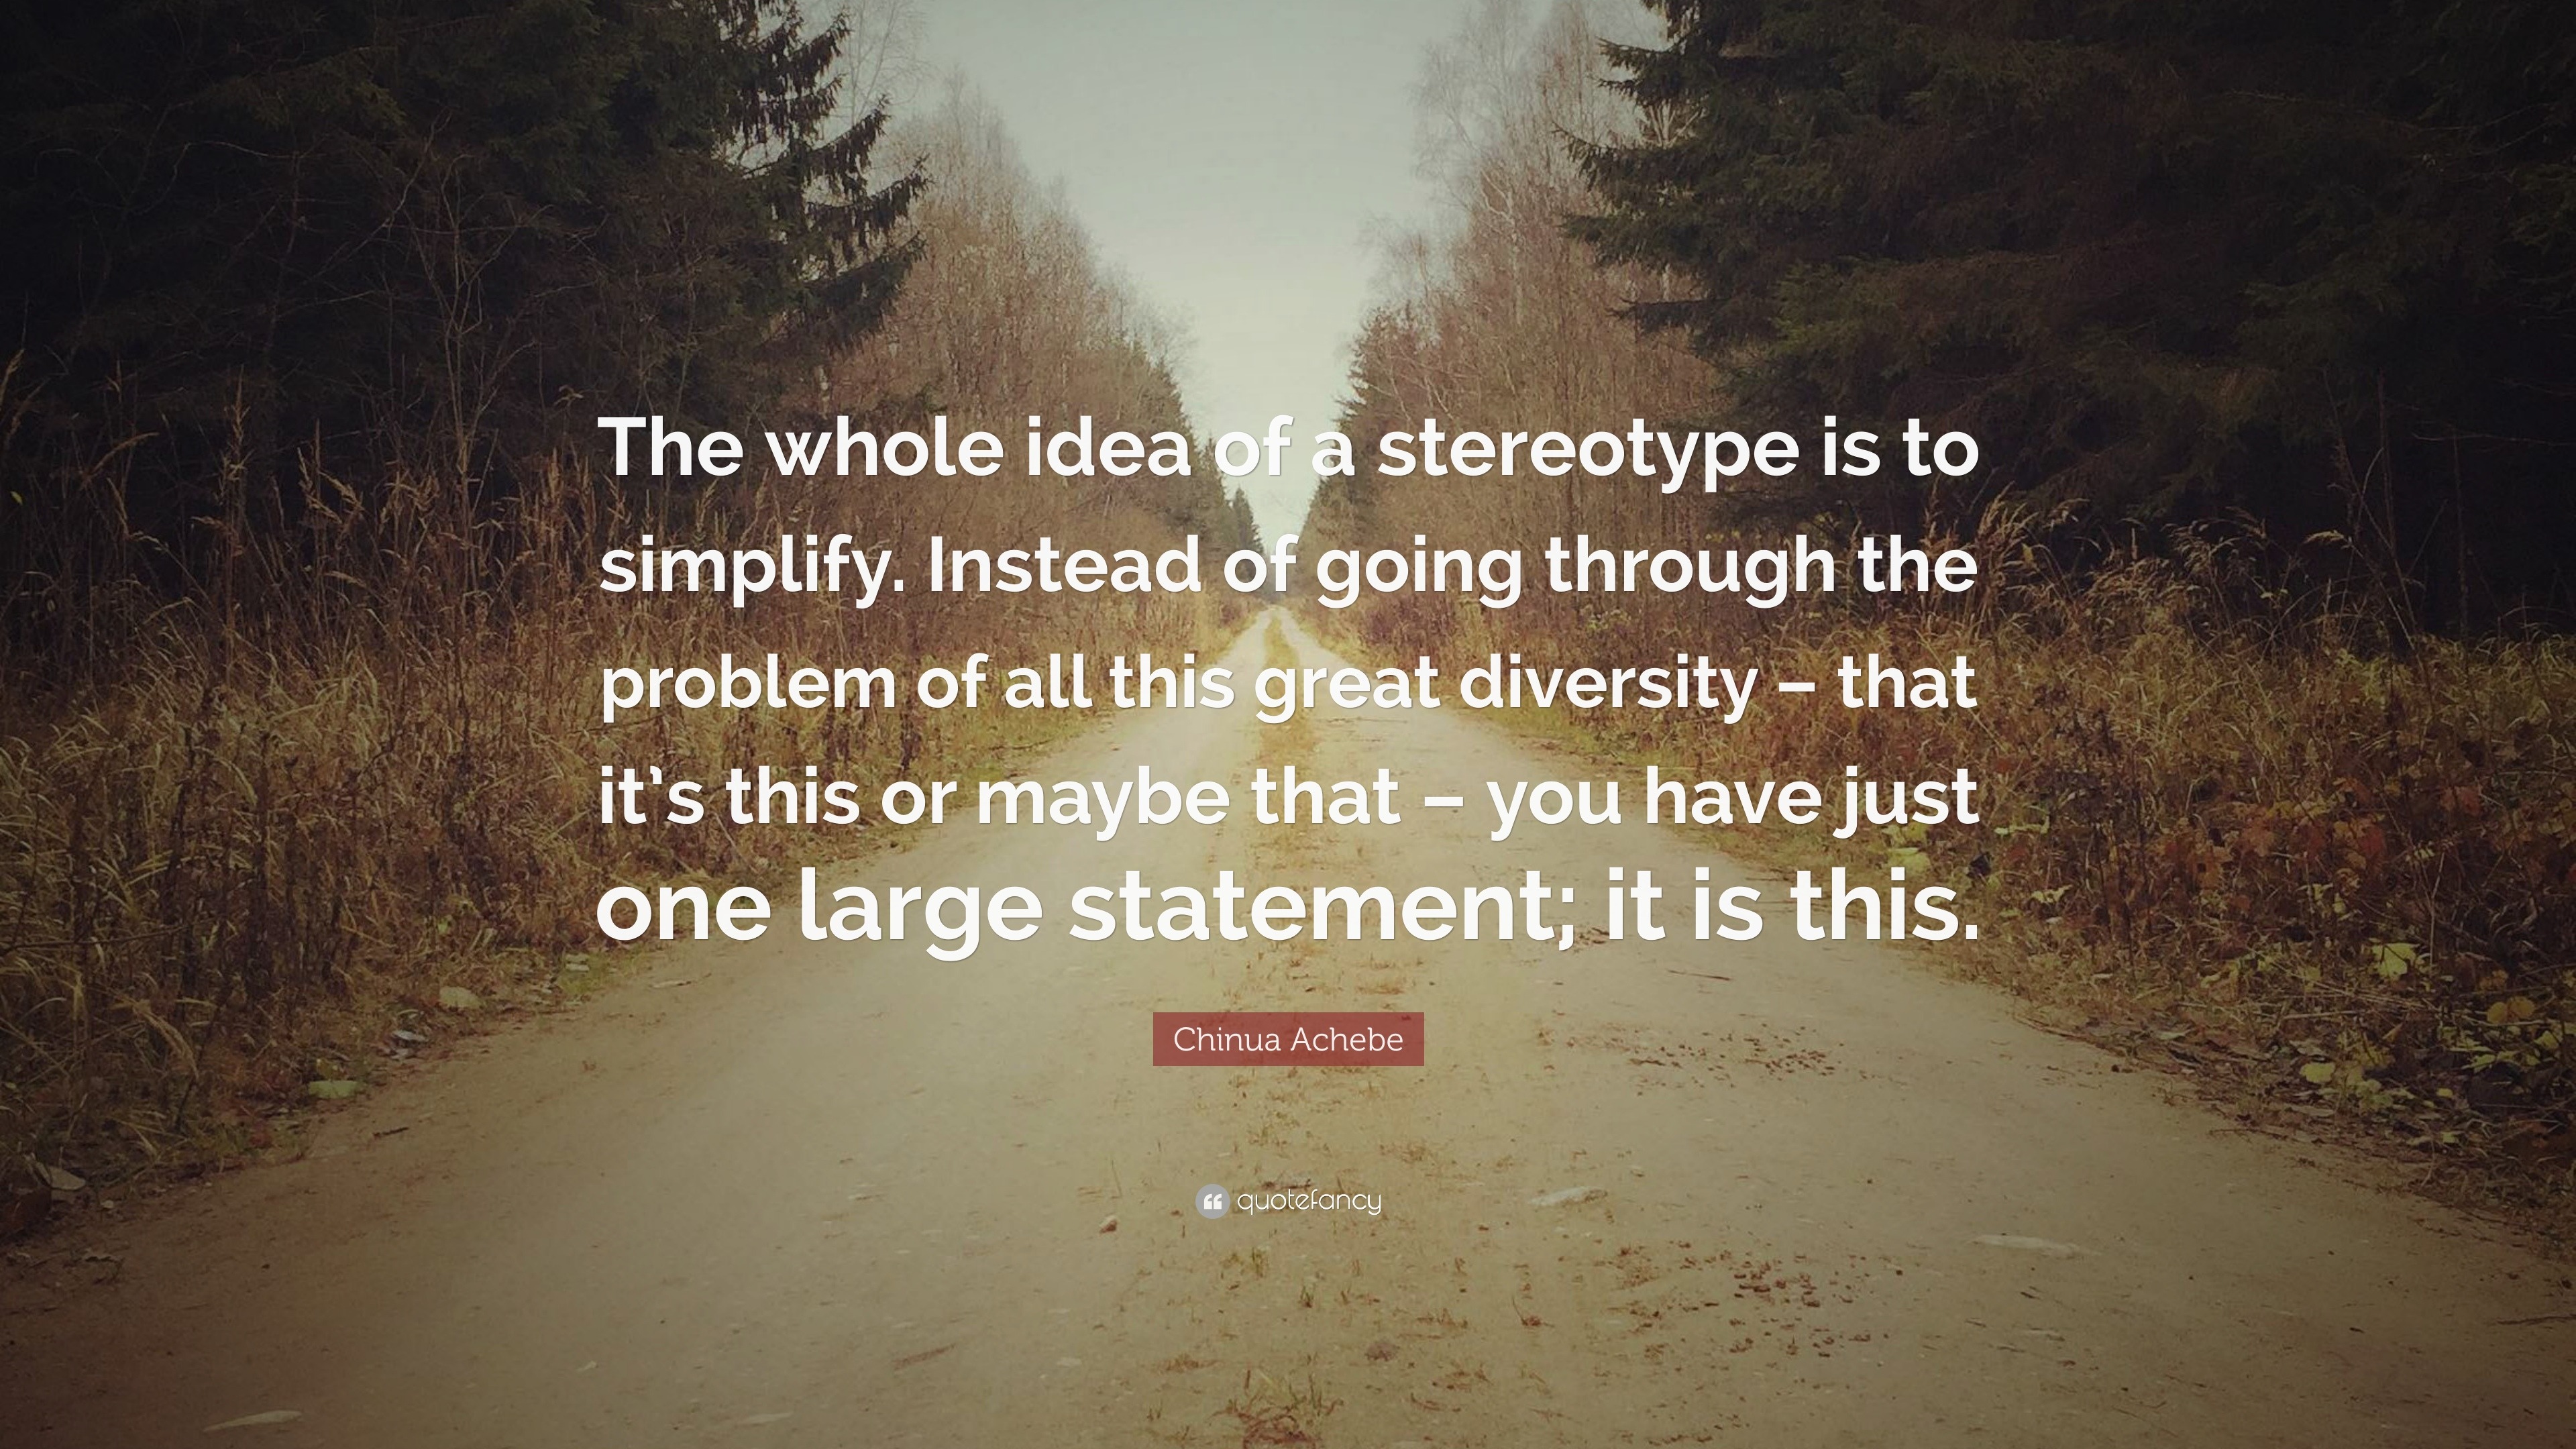 Chinua Achebe Quote: “The whole idea of a stereotype is to simplify. Instead of going through the problem of all this great diversity – that i...”